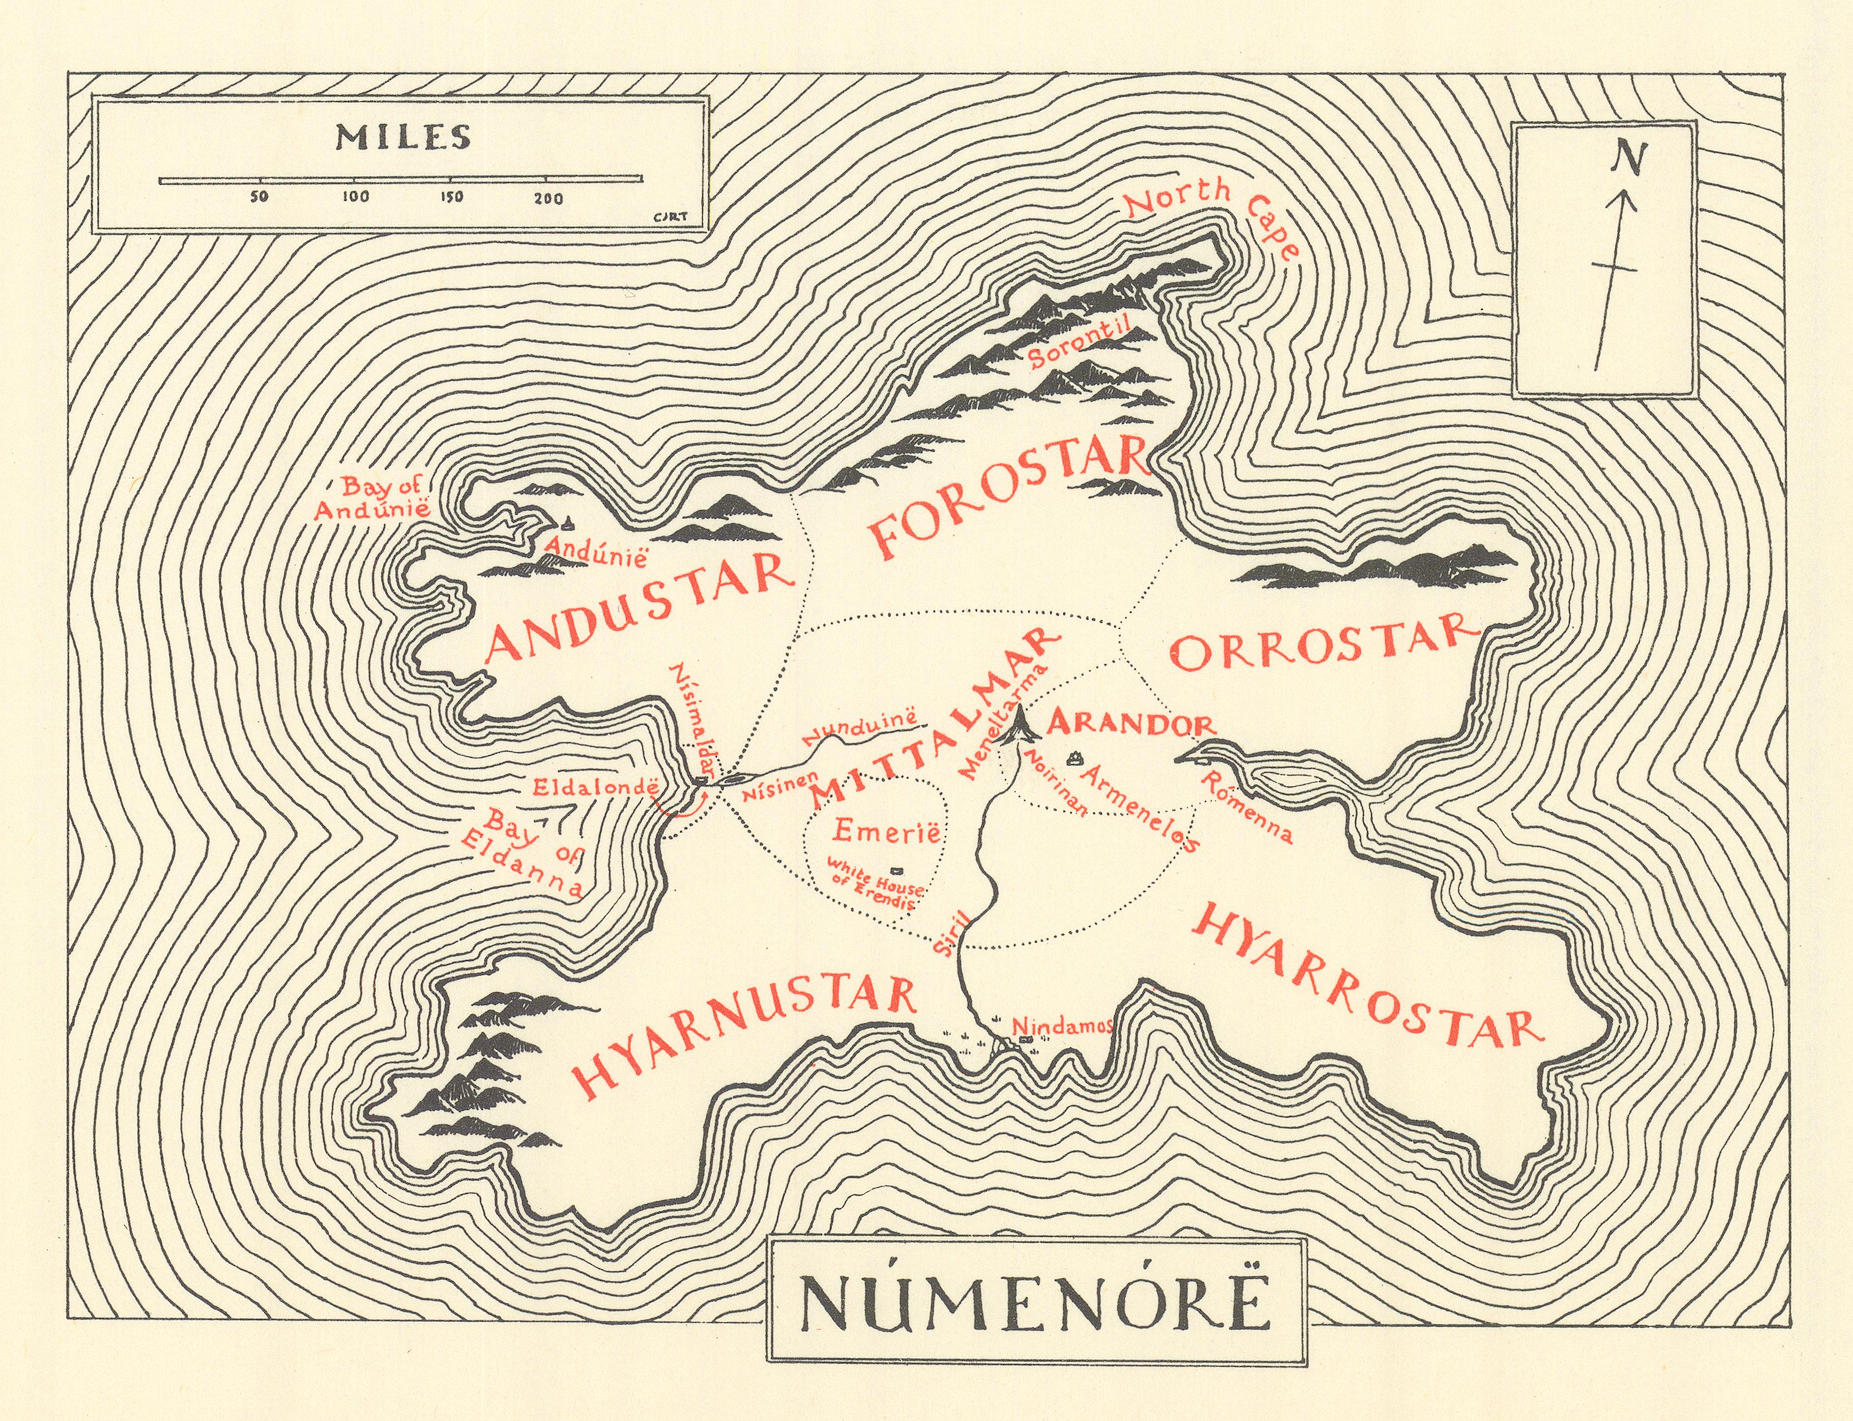 The Island of Númenórë / Numenore. Middle-earth. TOLKIEN 1980 old vintage map